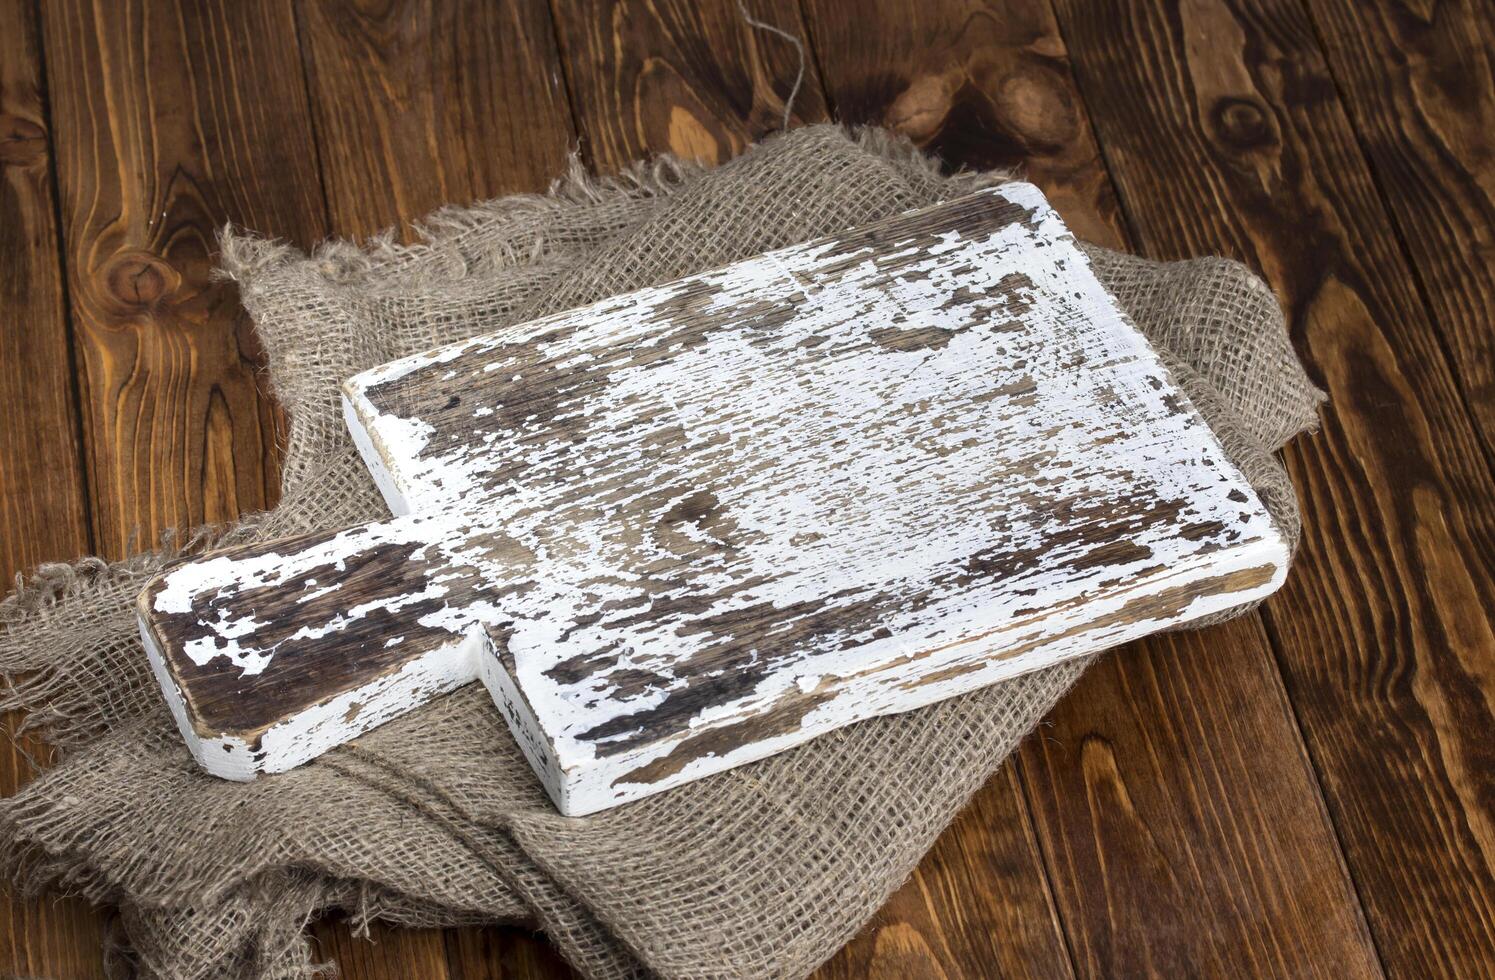 Old cutting board with burlap photo